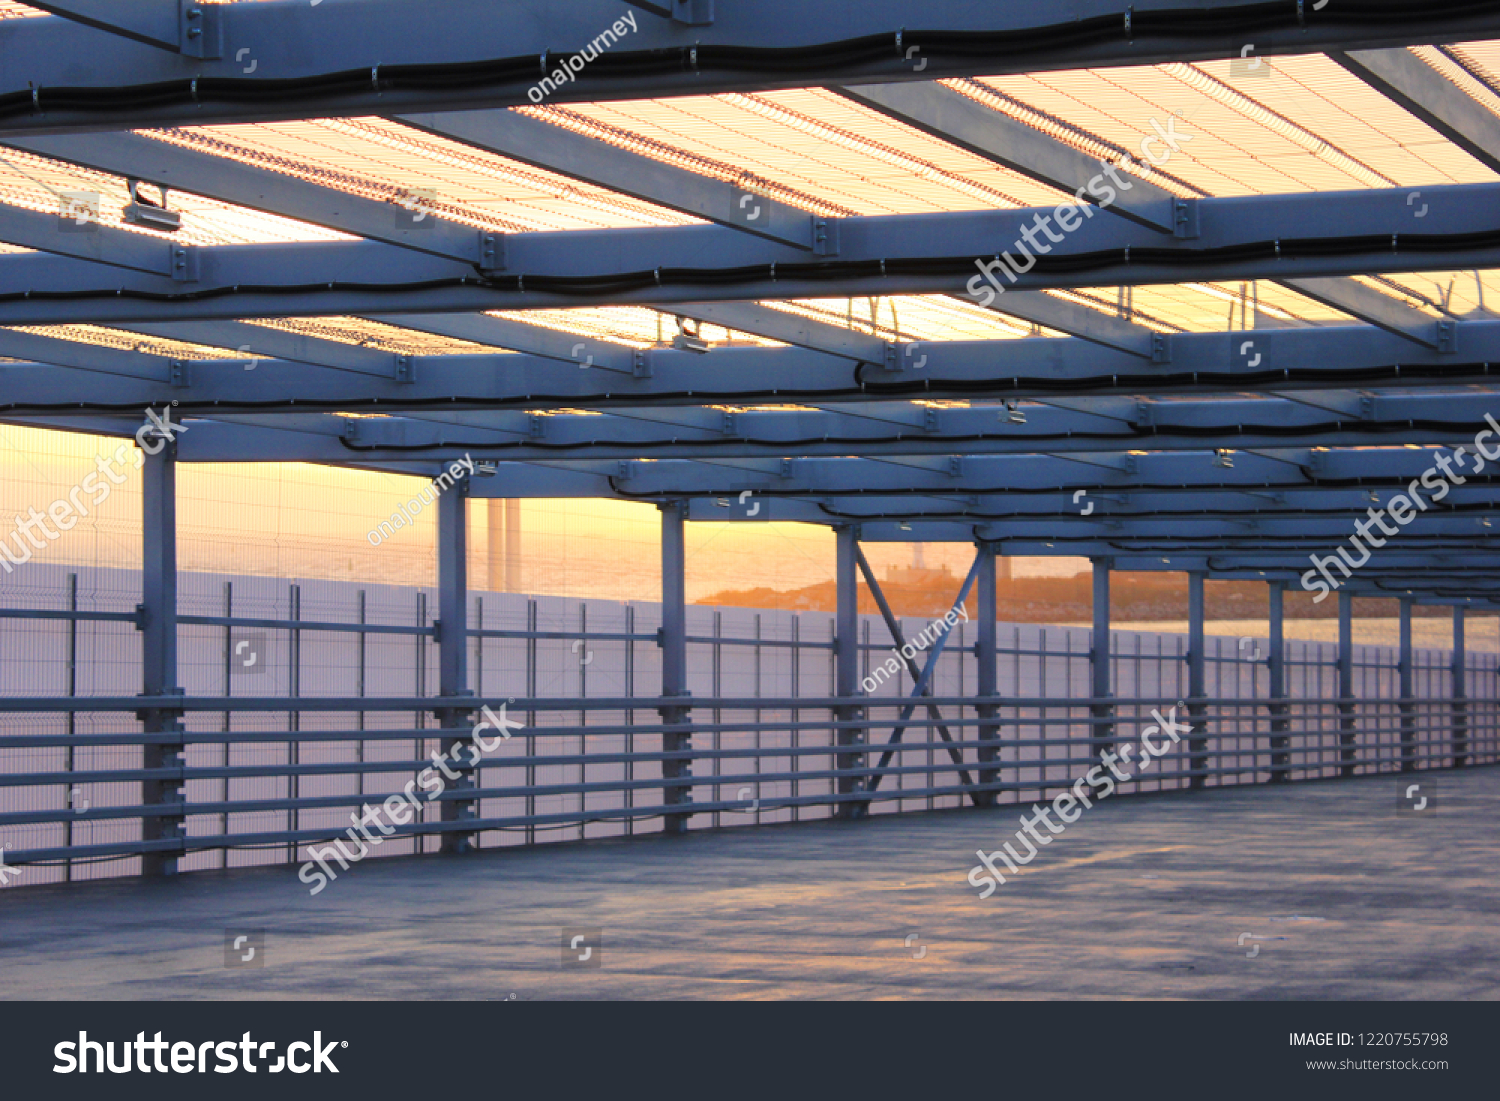 Urban Architecture Abstract Street Passageway Outdoors. Modern Structure of Empty Bridge Road on Evening Sunset Background. Contemporary Urban City Building Interior Passage with Metal Walls and Roof #1220755798